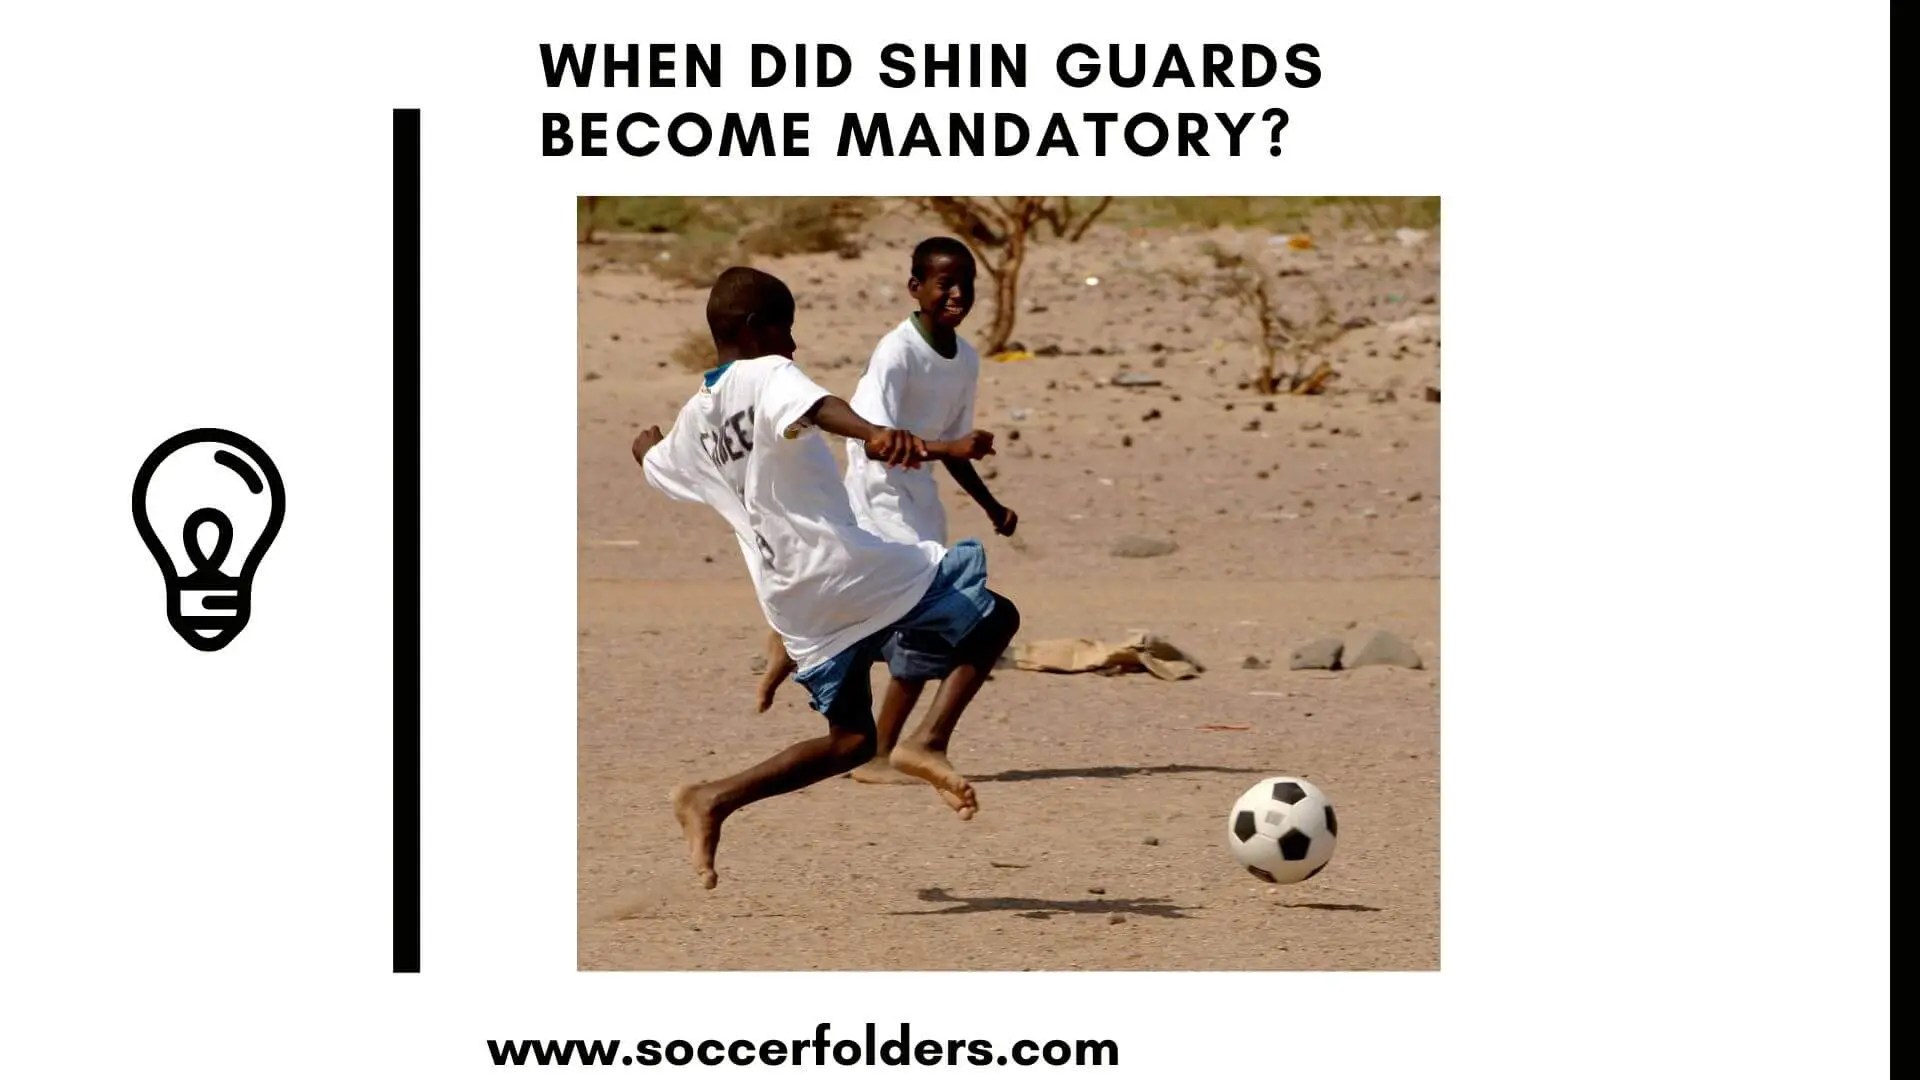 When did shin guards become mandatory in soccer - Featured image